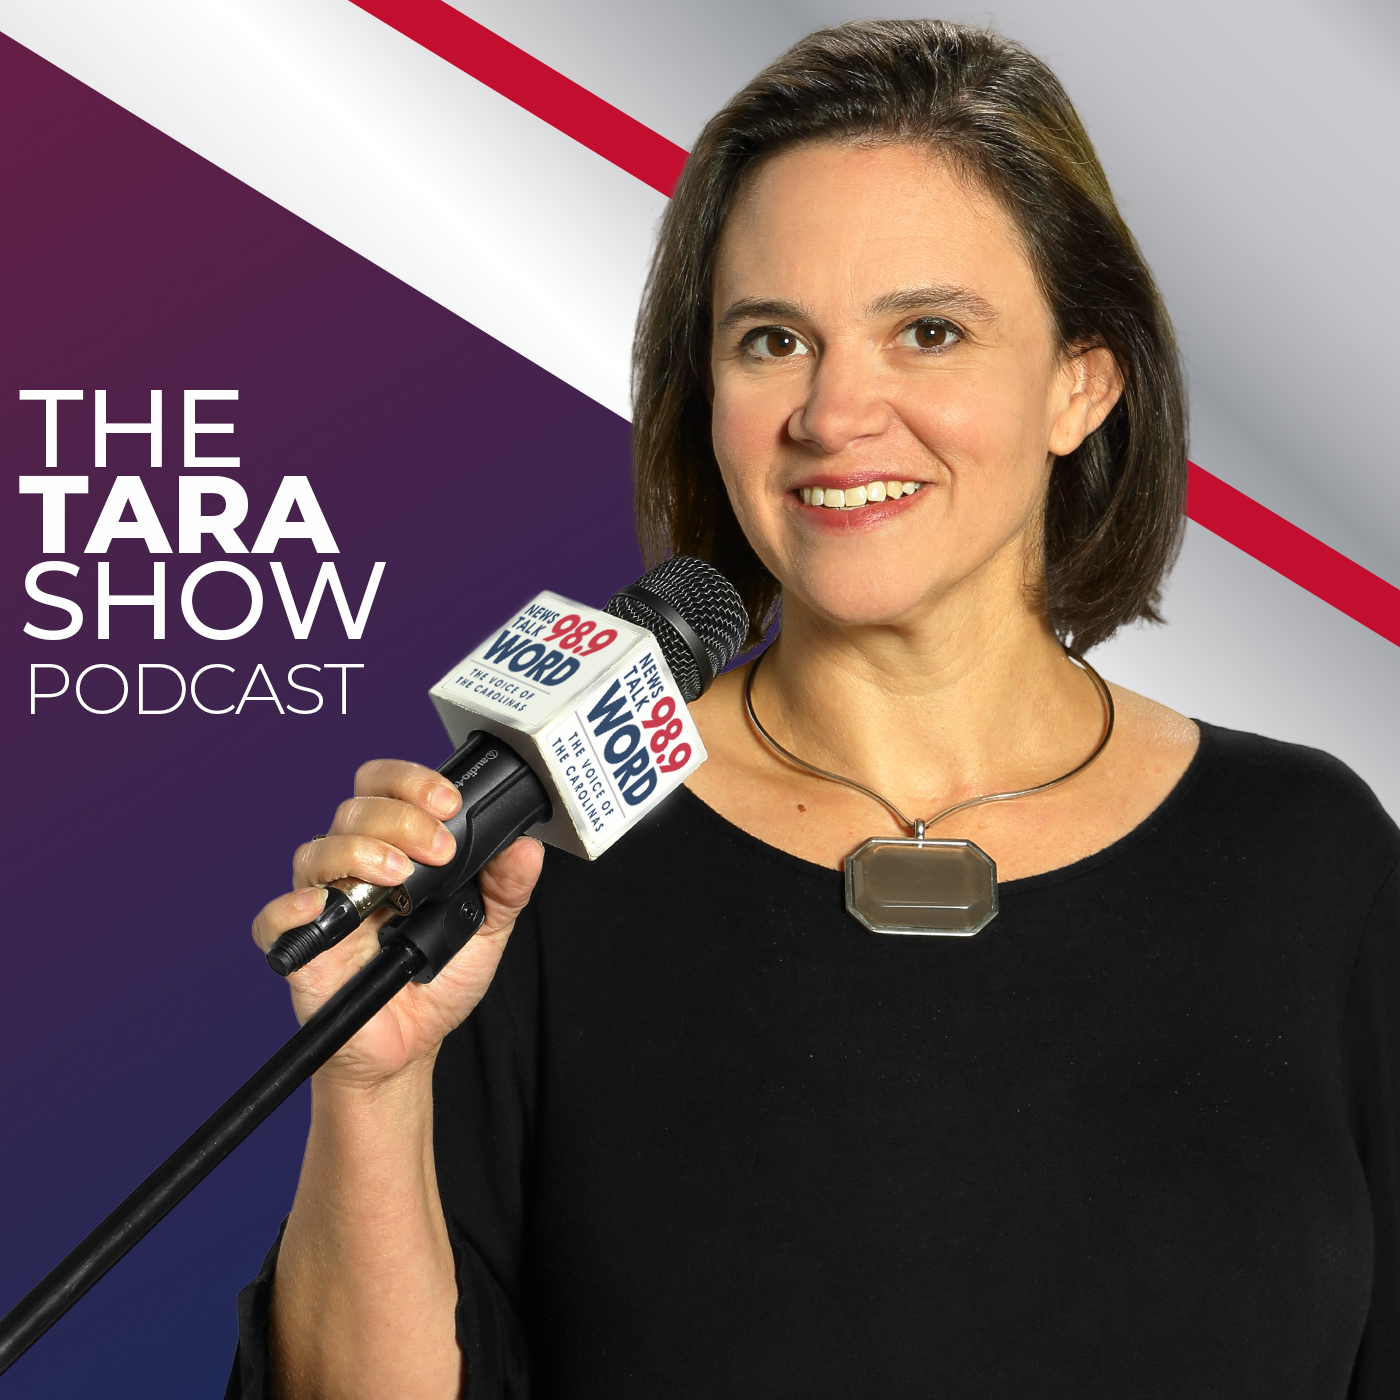 Hour 1: The Tara Show - “Liberal Anti Semitism is Out of Hand” “The Left’s Right to be Violent” “Liberals now Blame Women for being ‘R-Worded’” “A Healthy America” 